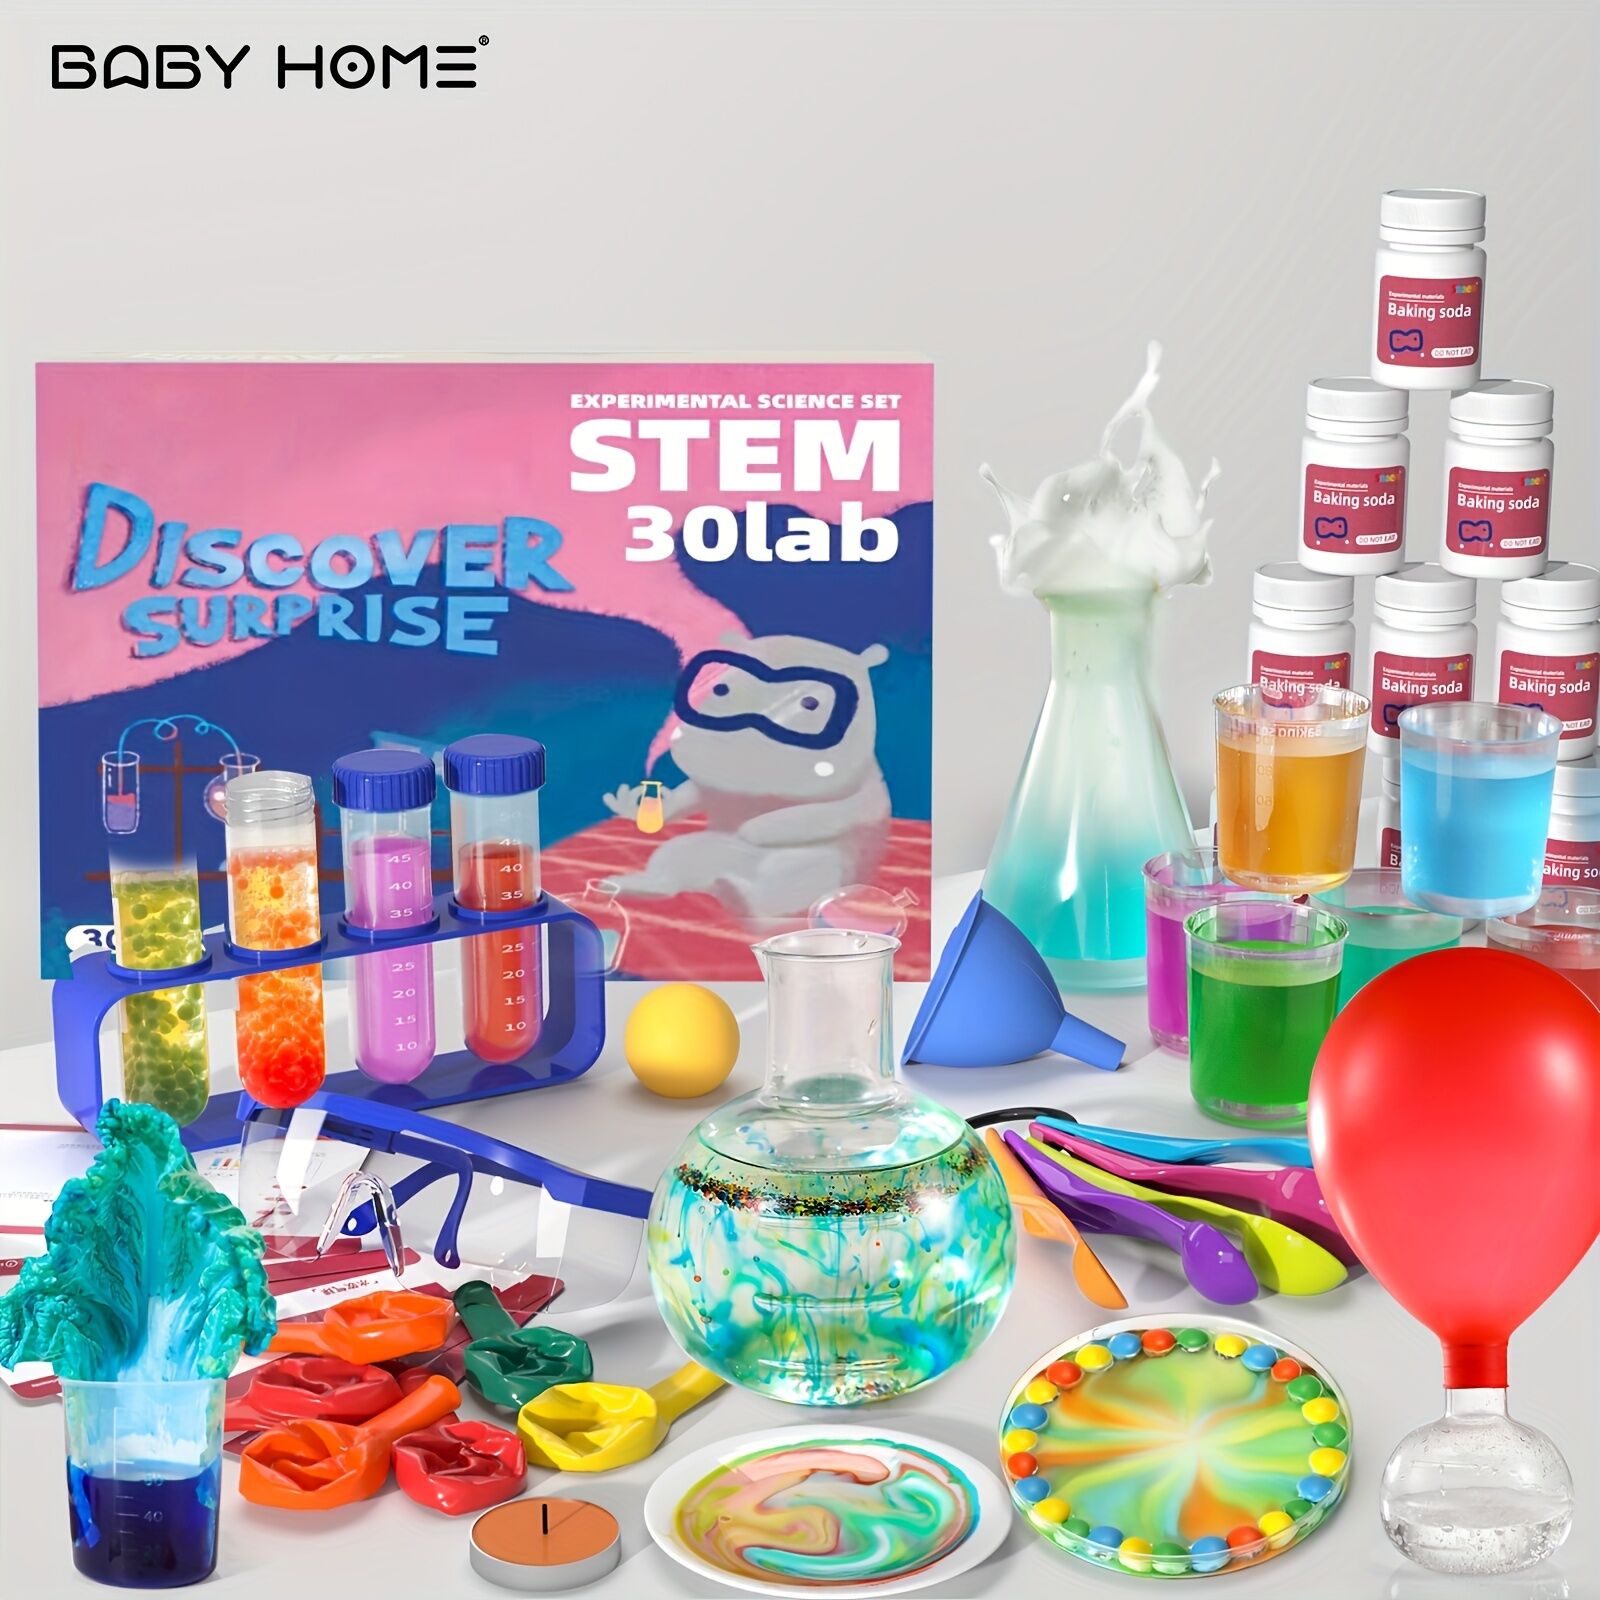 Temu Babyhome Science Kit With 30 Science Lab Experiments, Diy Stem Educational Learning Scientific Tools For Boys And Girls Kids Toys Gift